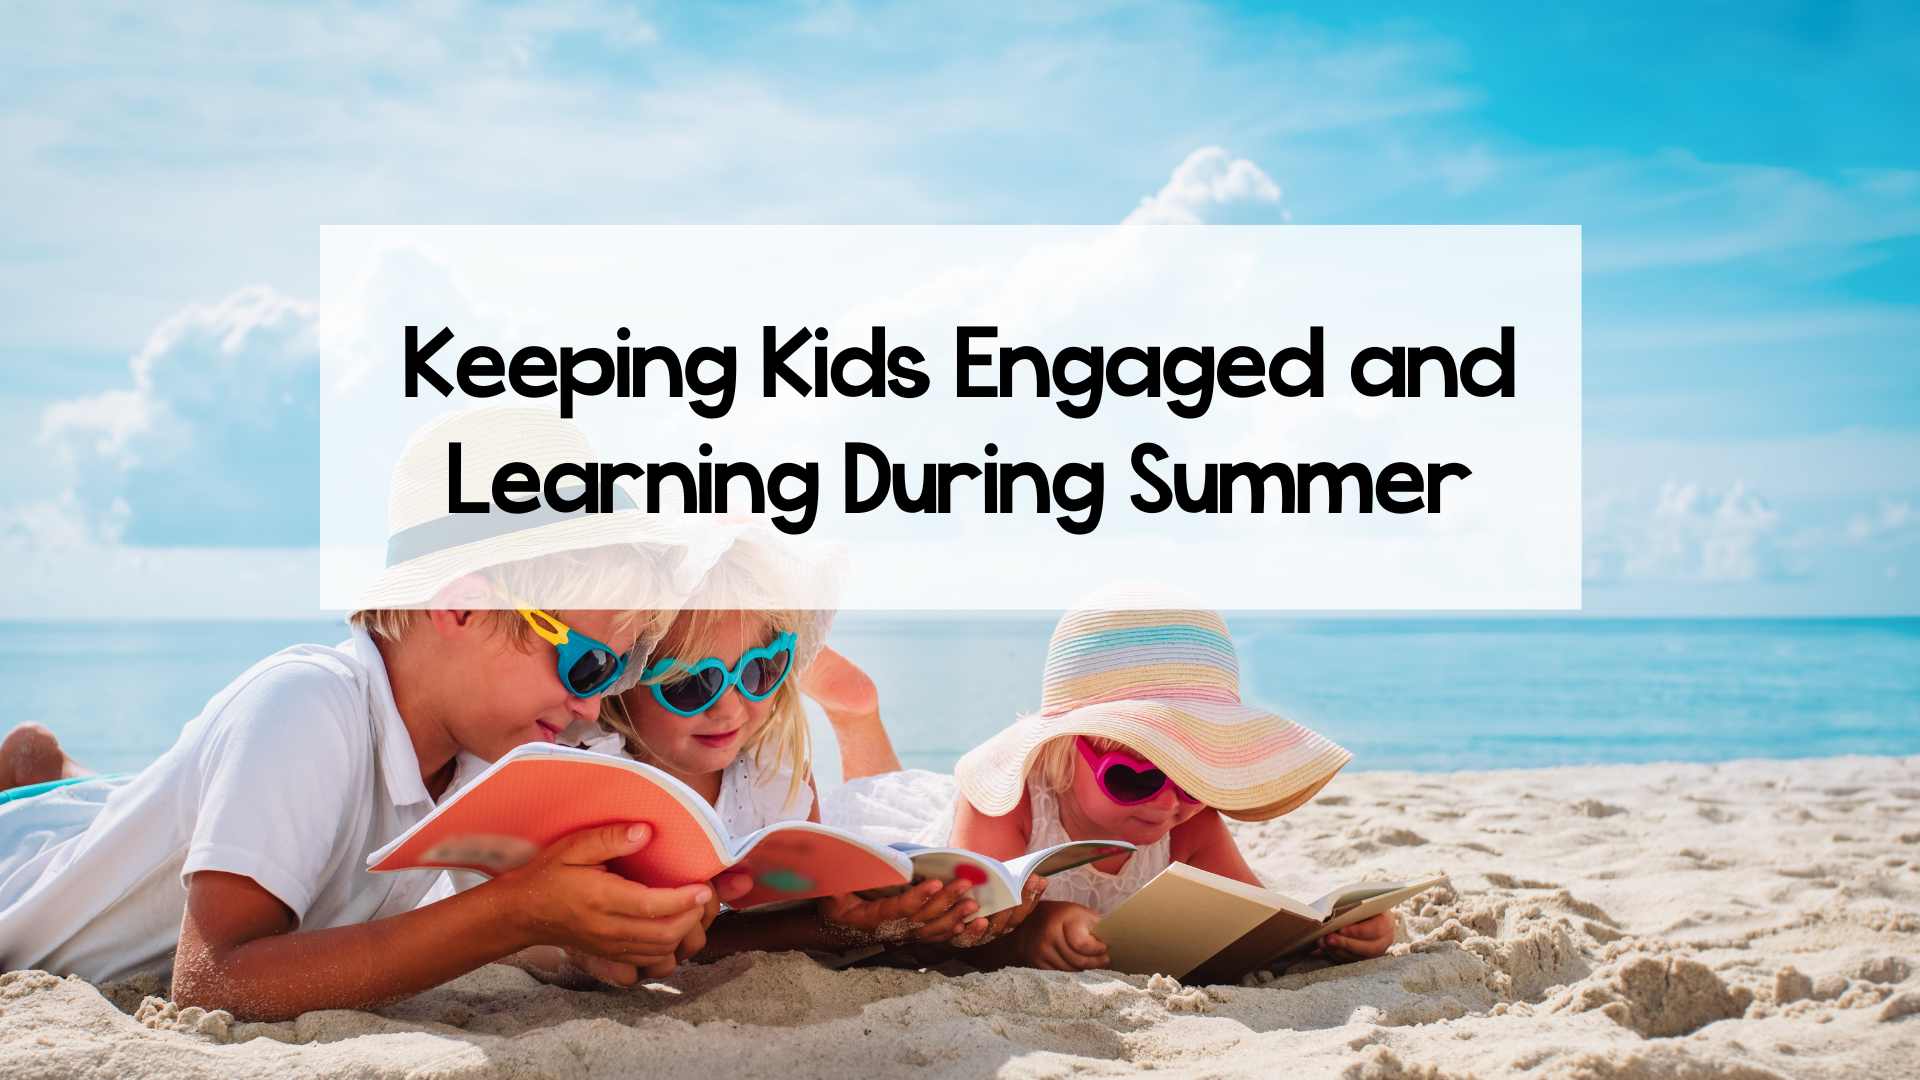 How to Keep Kids Engaged and Learning during Summer